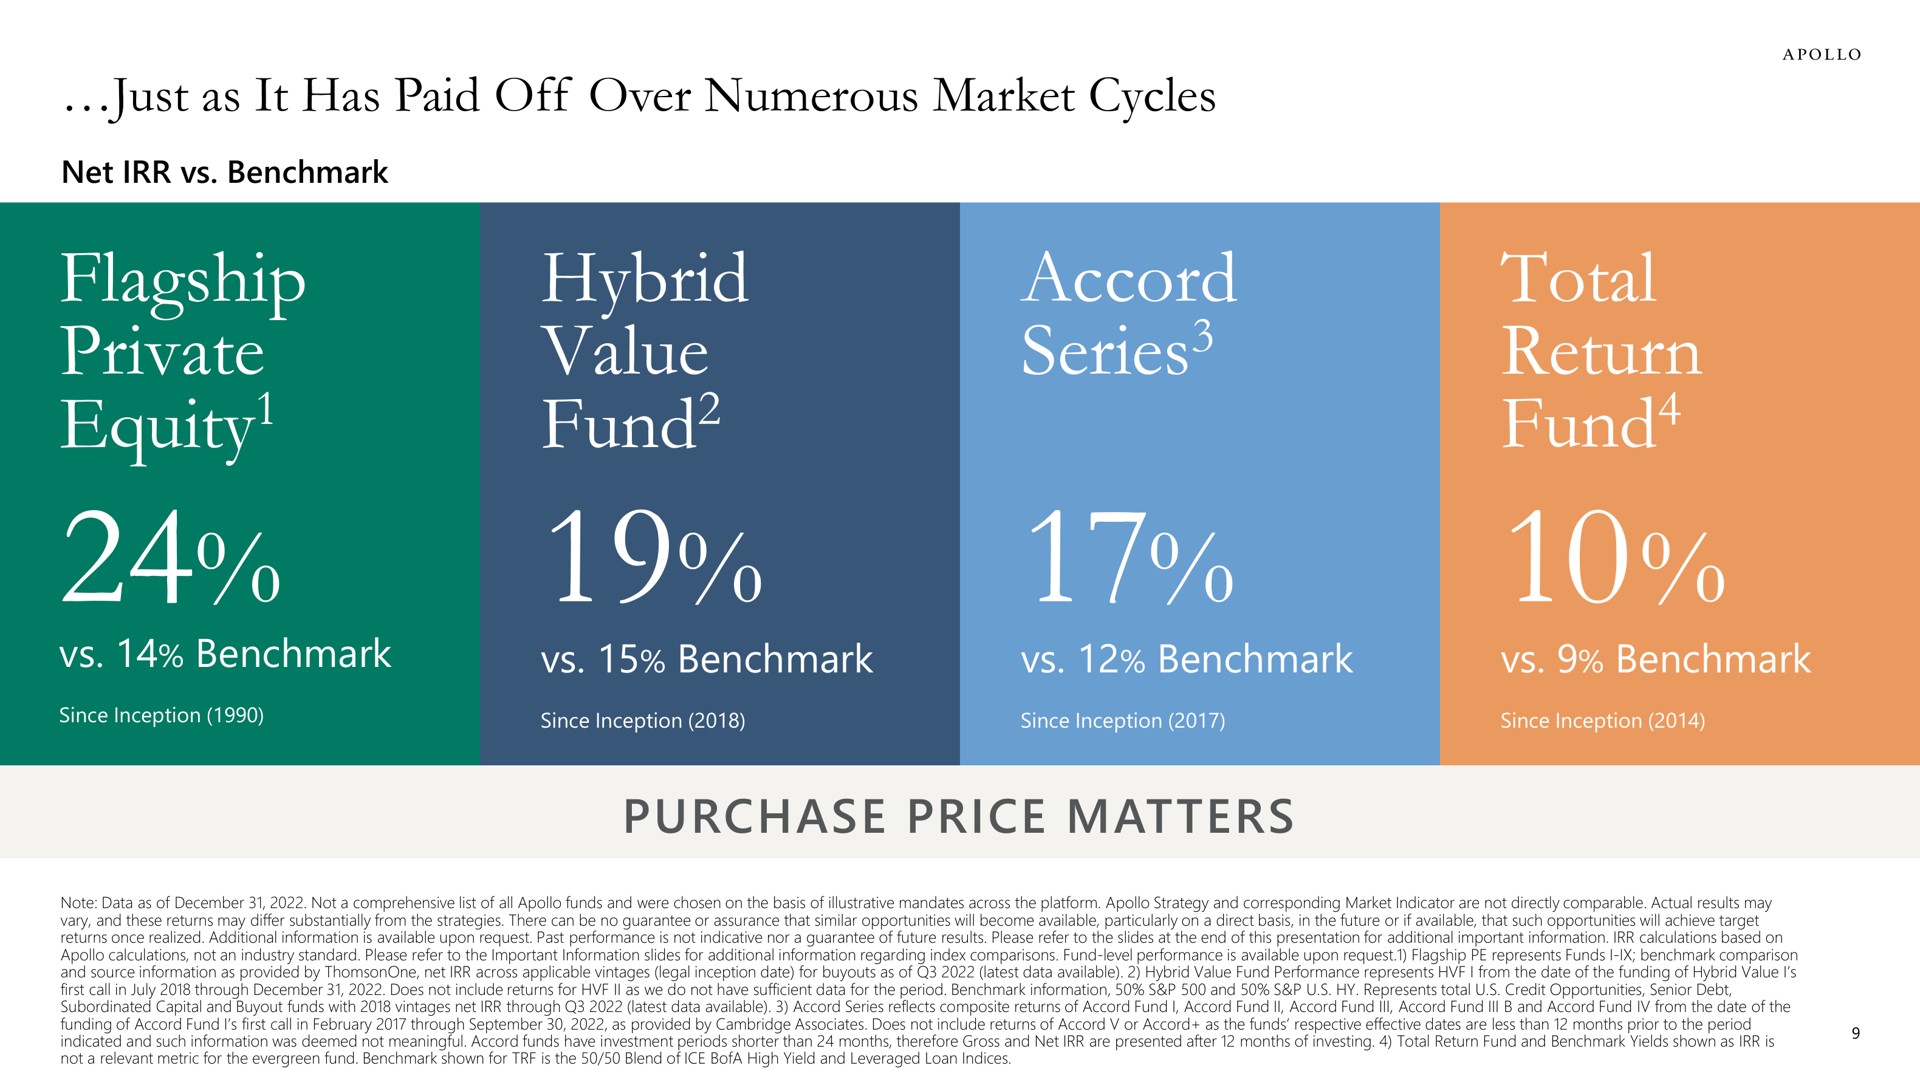 just as it has paid off over numerous market cycles flagship private equity hybrid value fund accord series total return fund purchase price matters equity fund series fund | Apollo Global Management